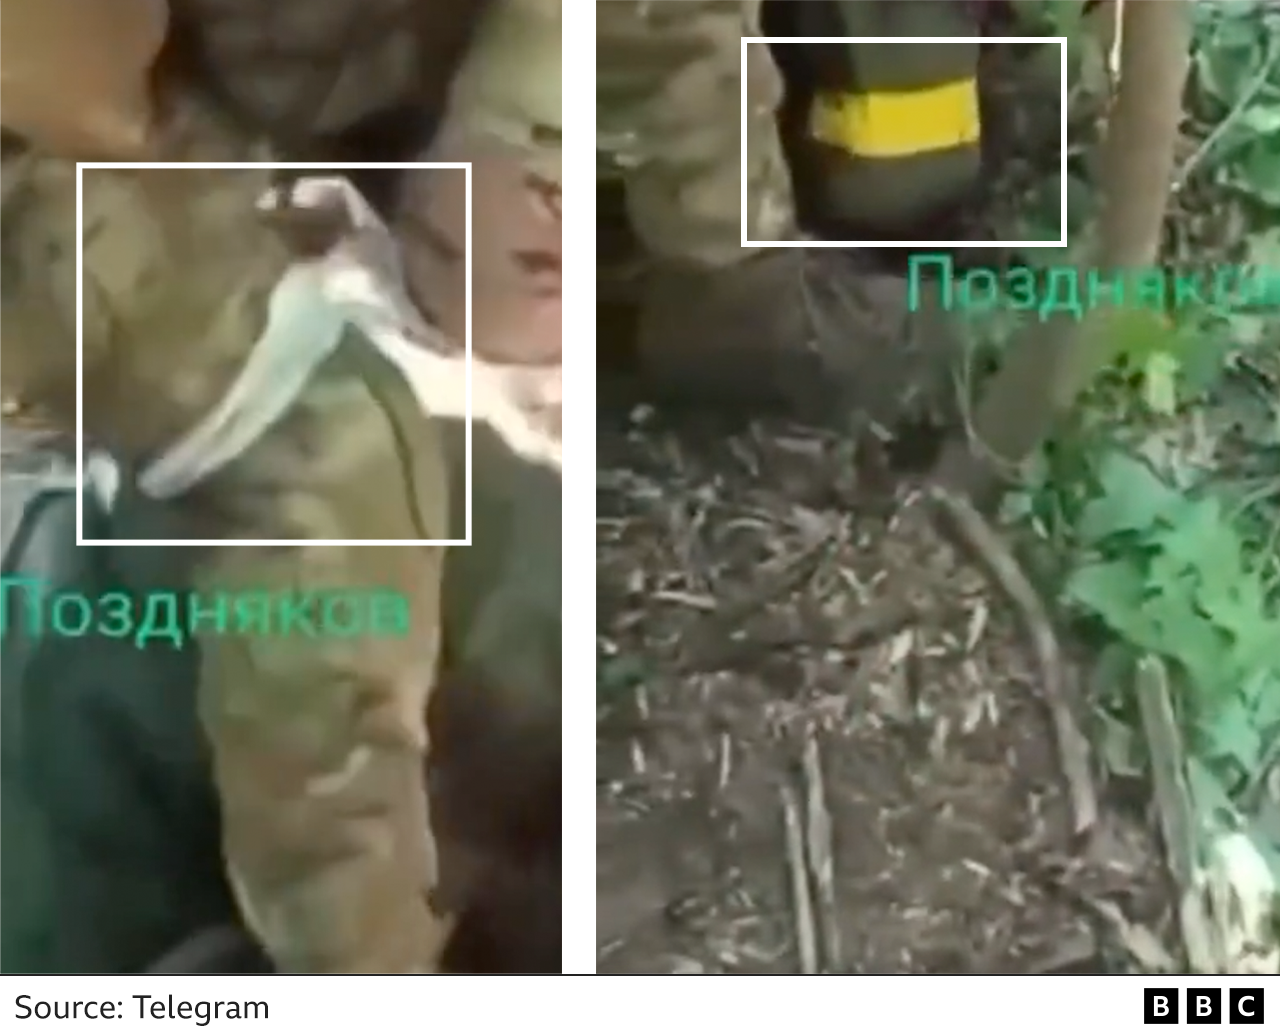 Video frames showing a yellow armband and white cloth leg wrapping used by Ukrainian and Russian soldiers respectively